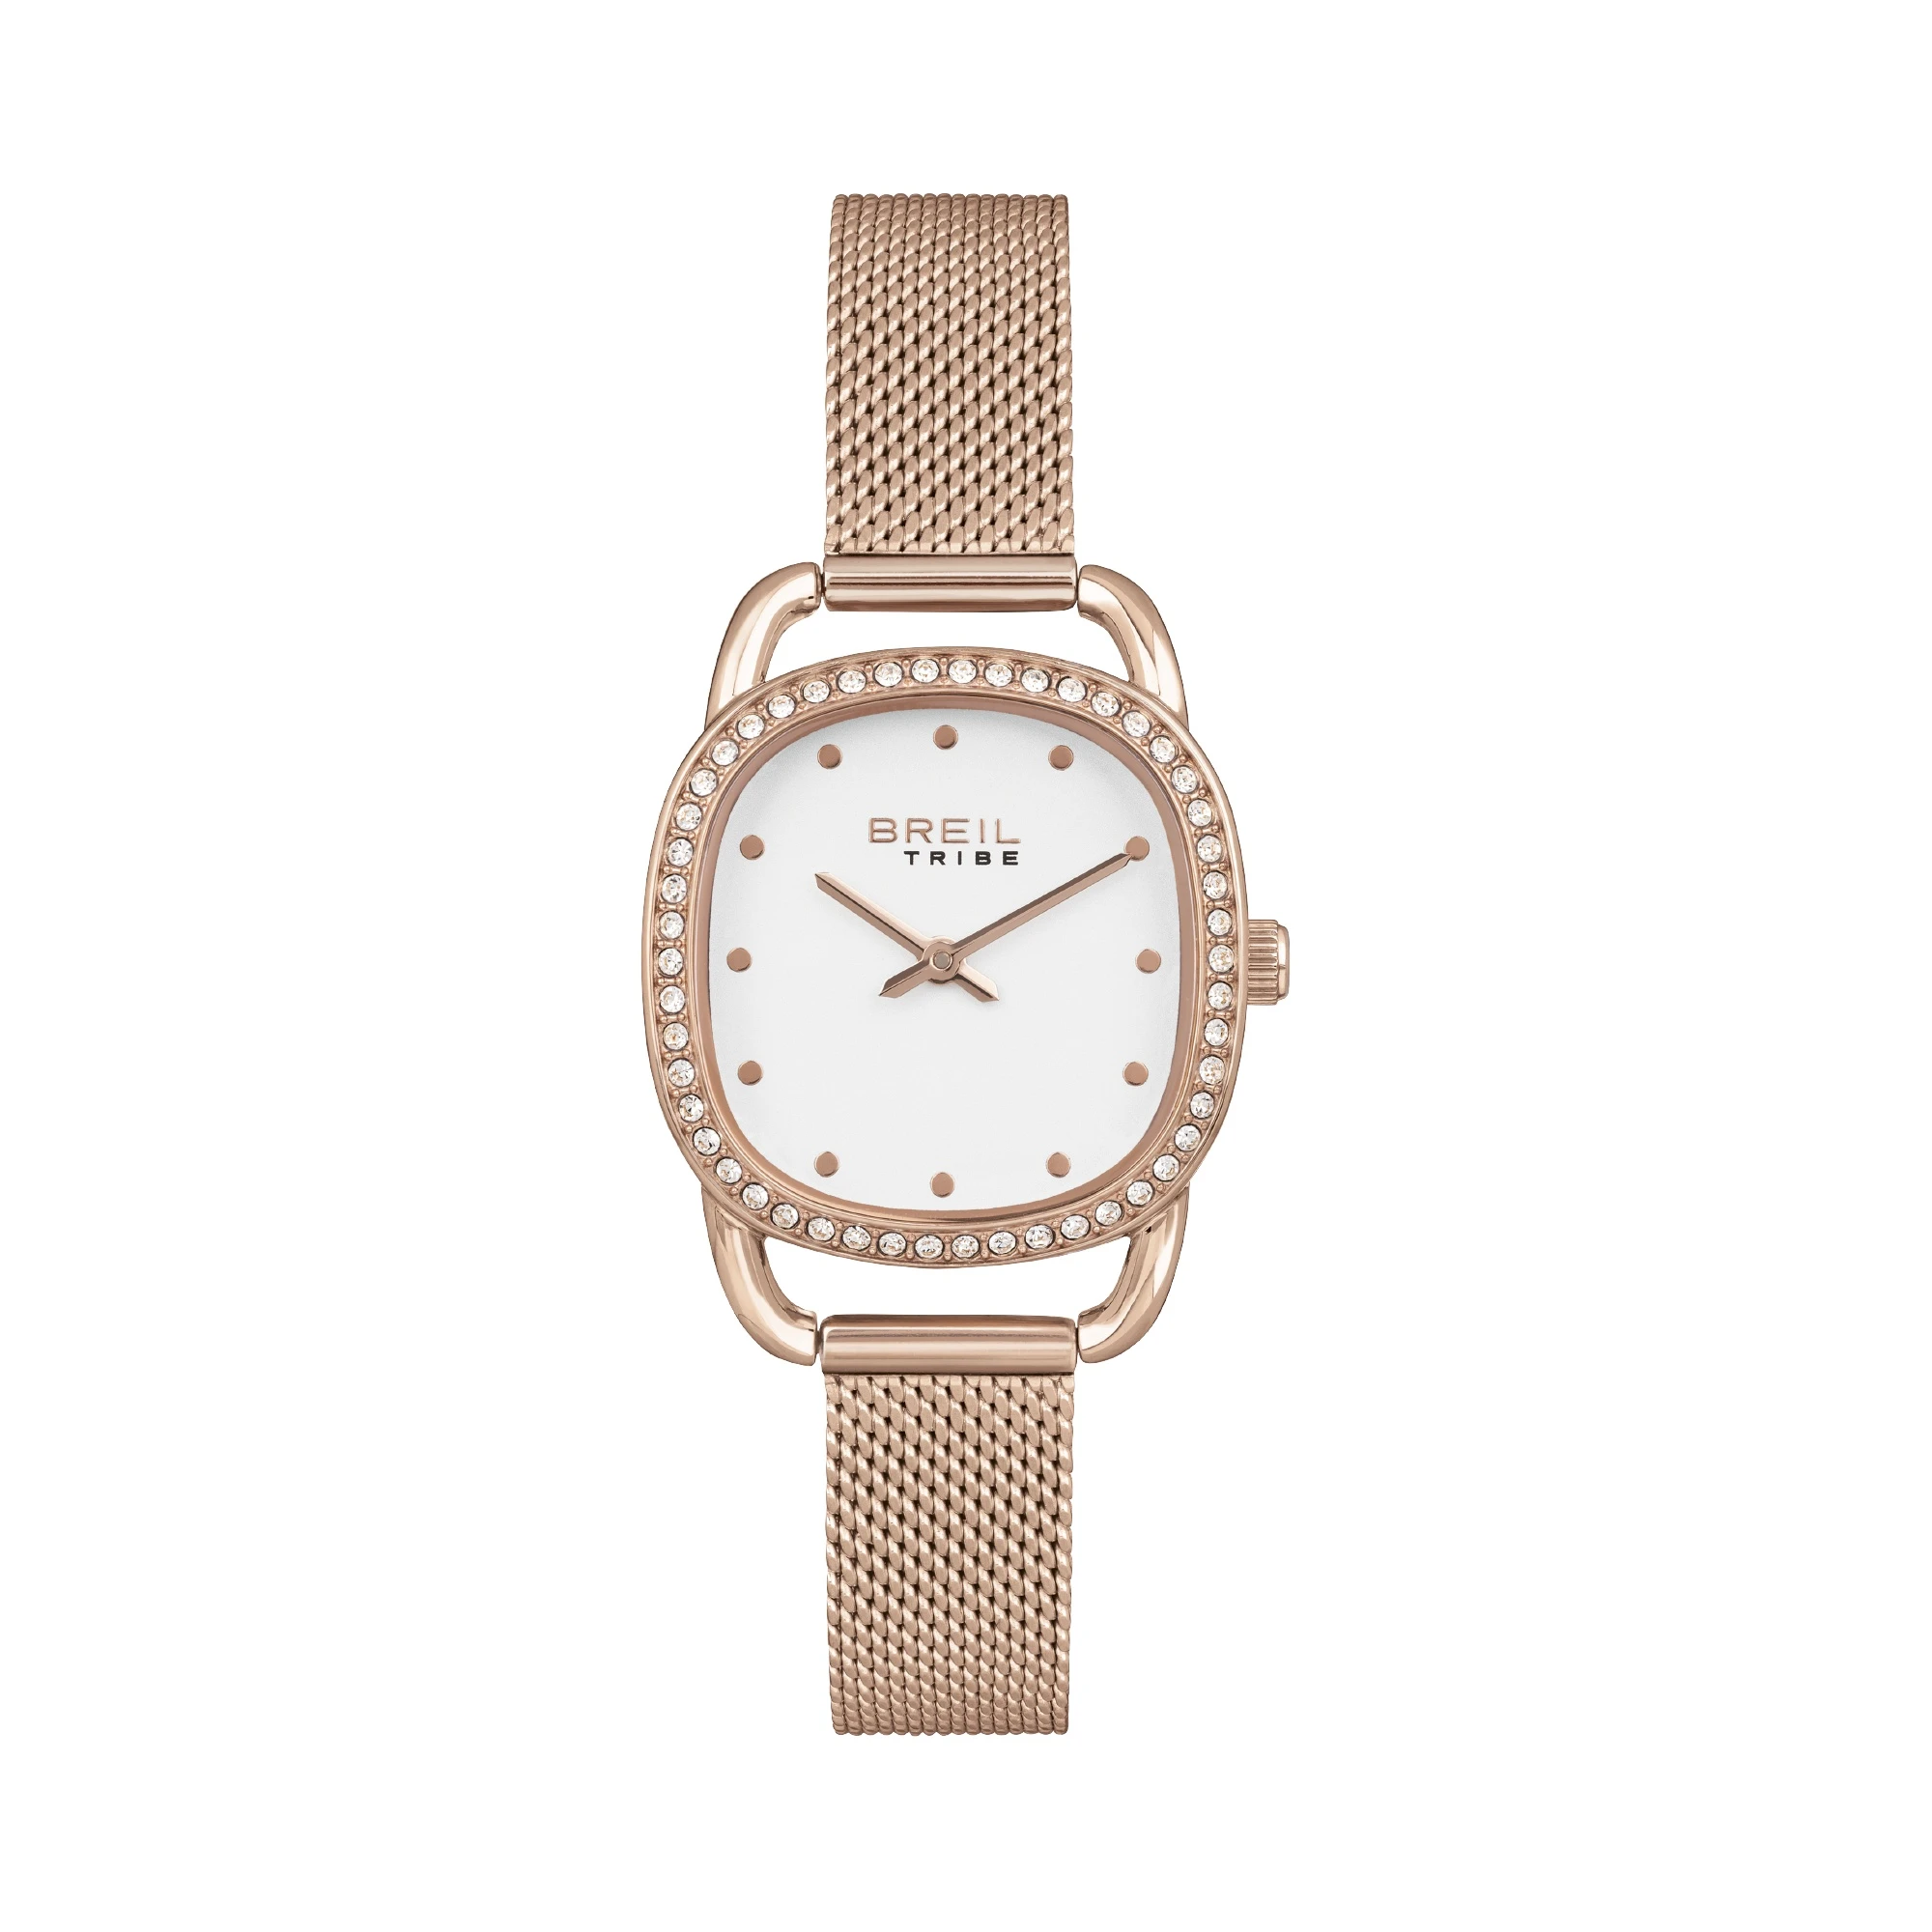 PENELOPE - TIME ONLY LADY 28X28 MM - 1 - EW0492 | Breil